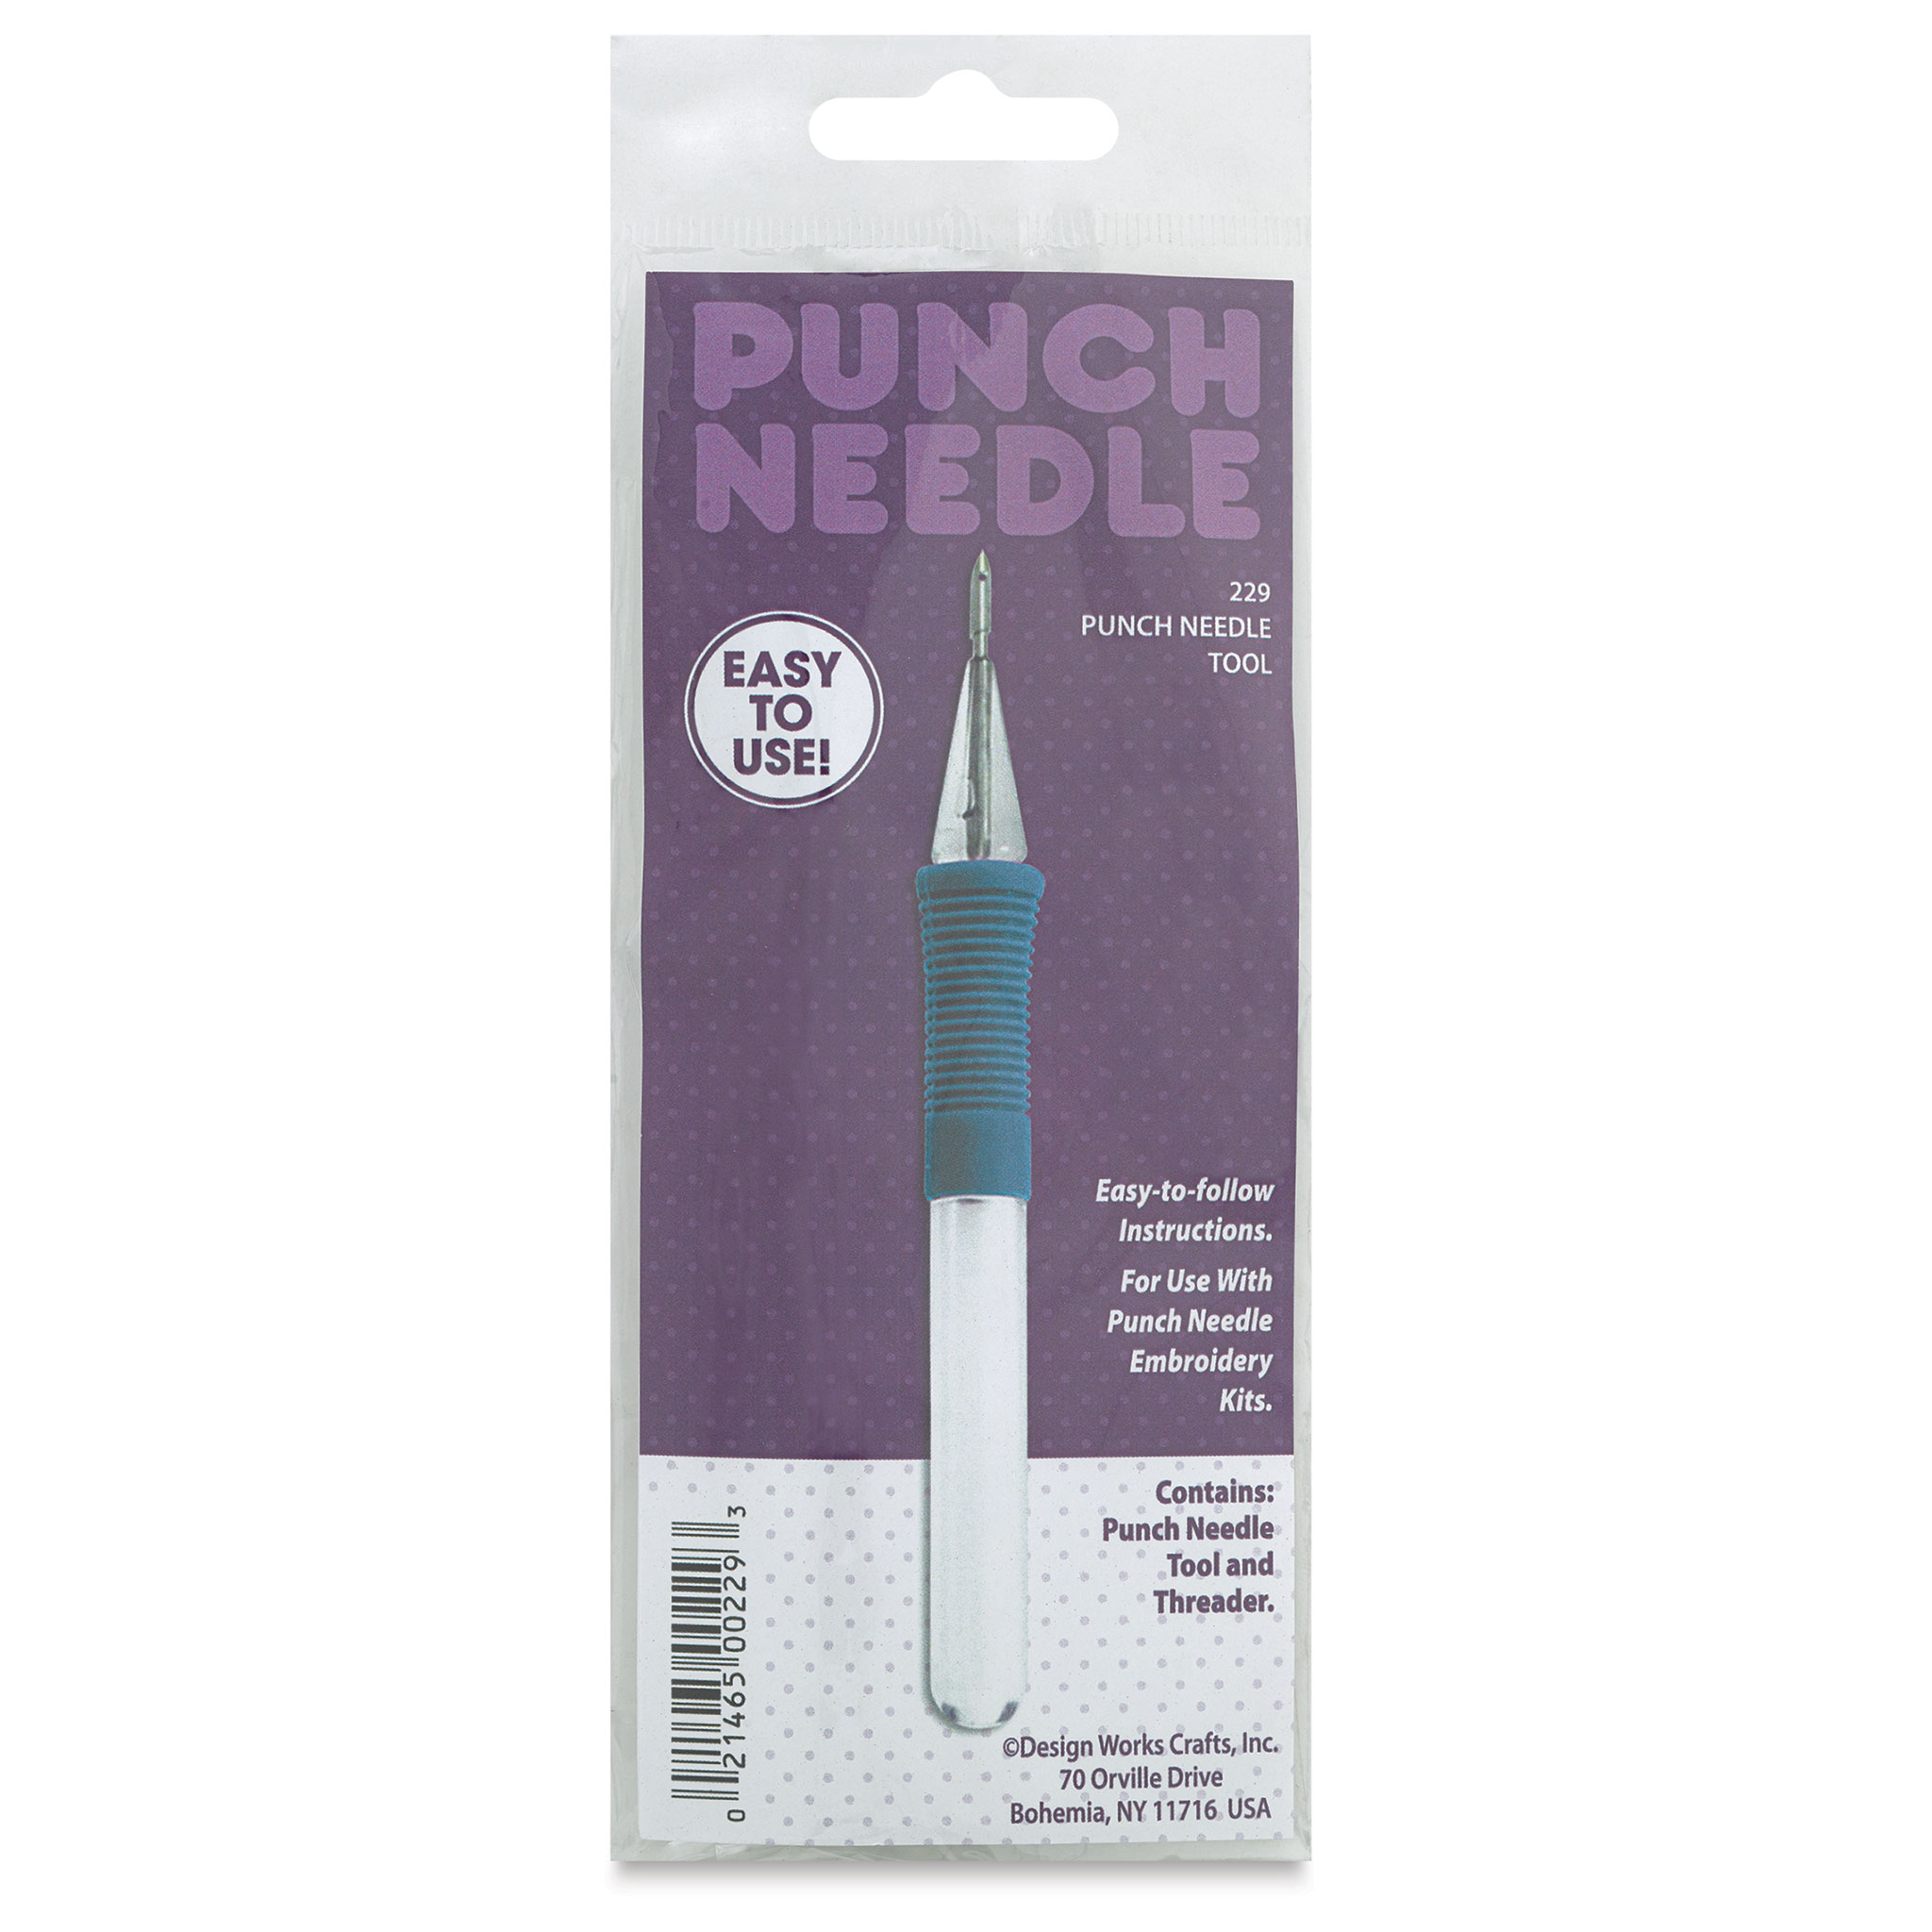 Design Works Crafts, Punch Needle Tool for Medium Thread and Yarn, 265